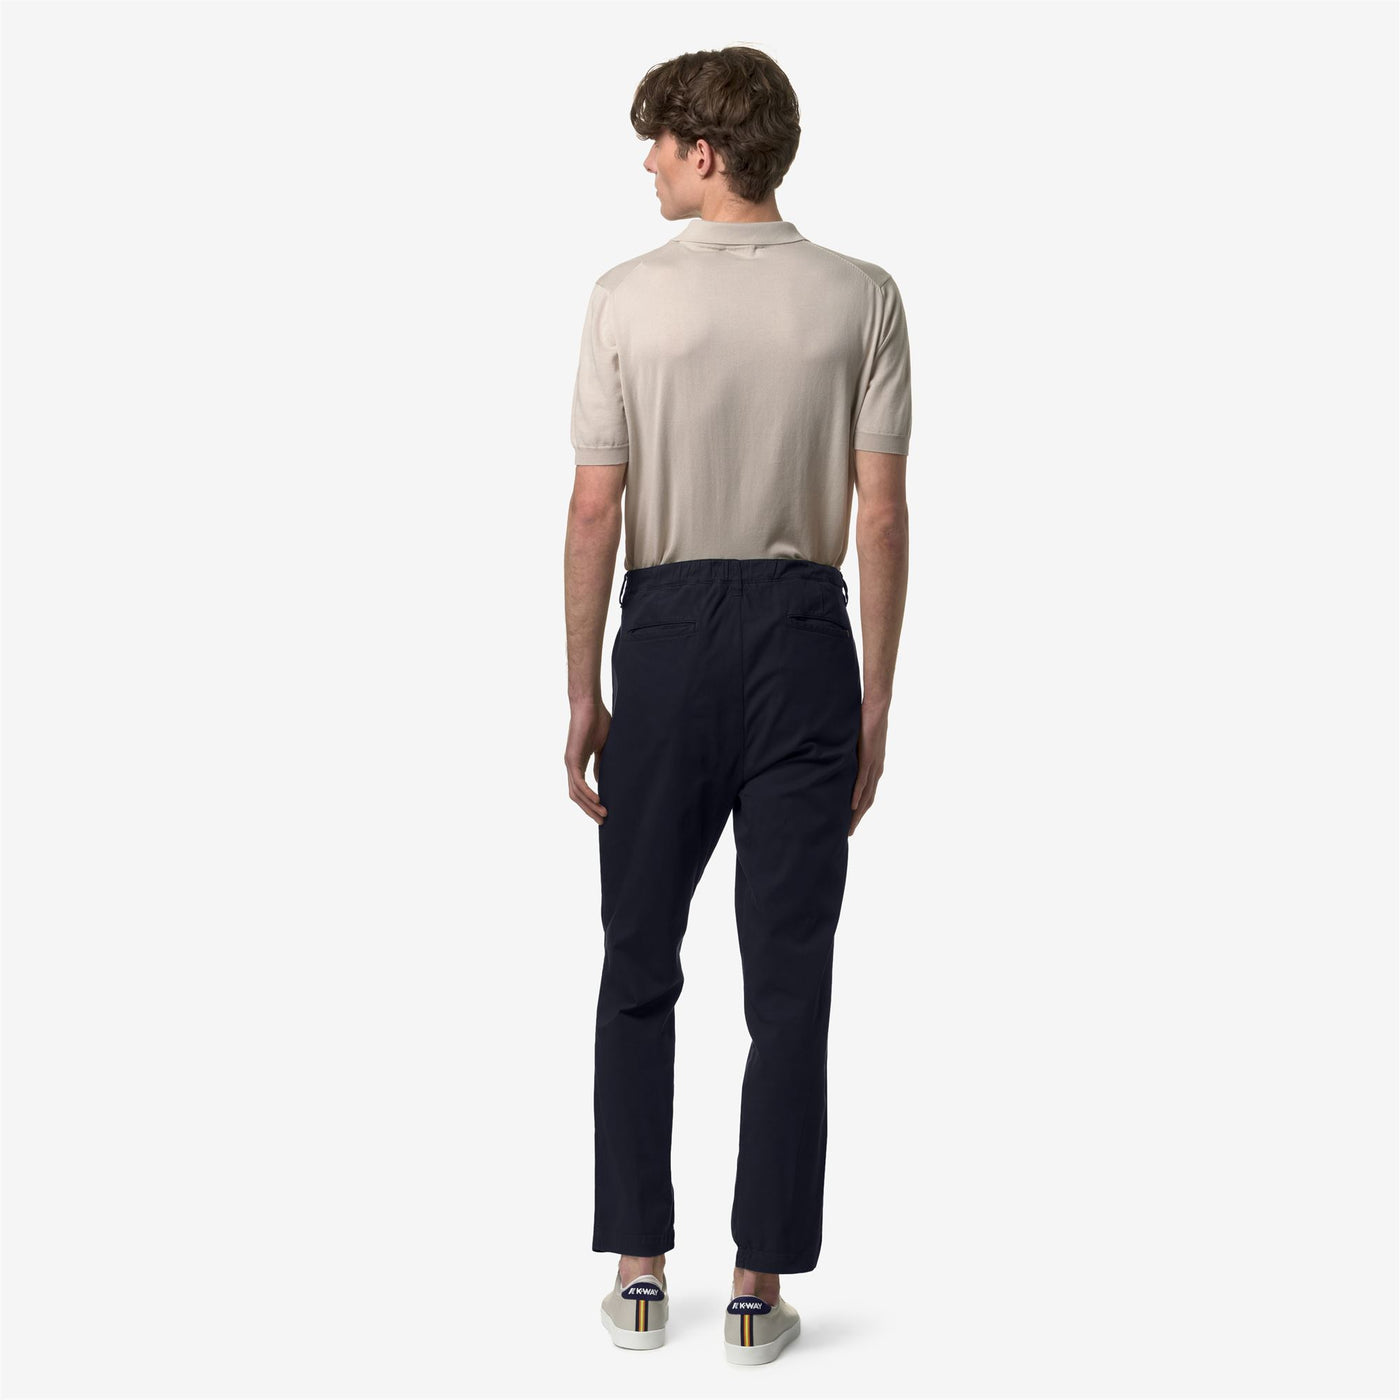 Pants Man BRAN CHINO BLUE DEPTH Dressed Front Double		